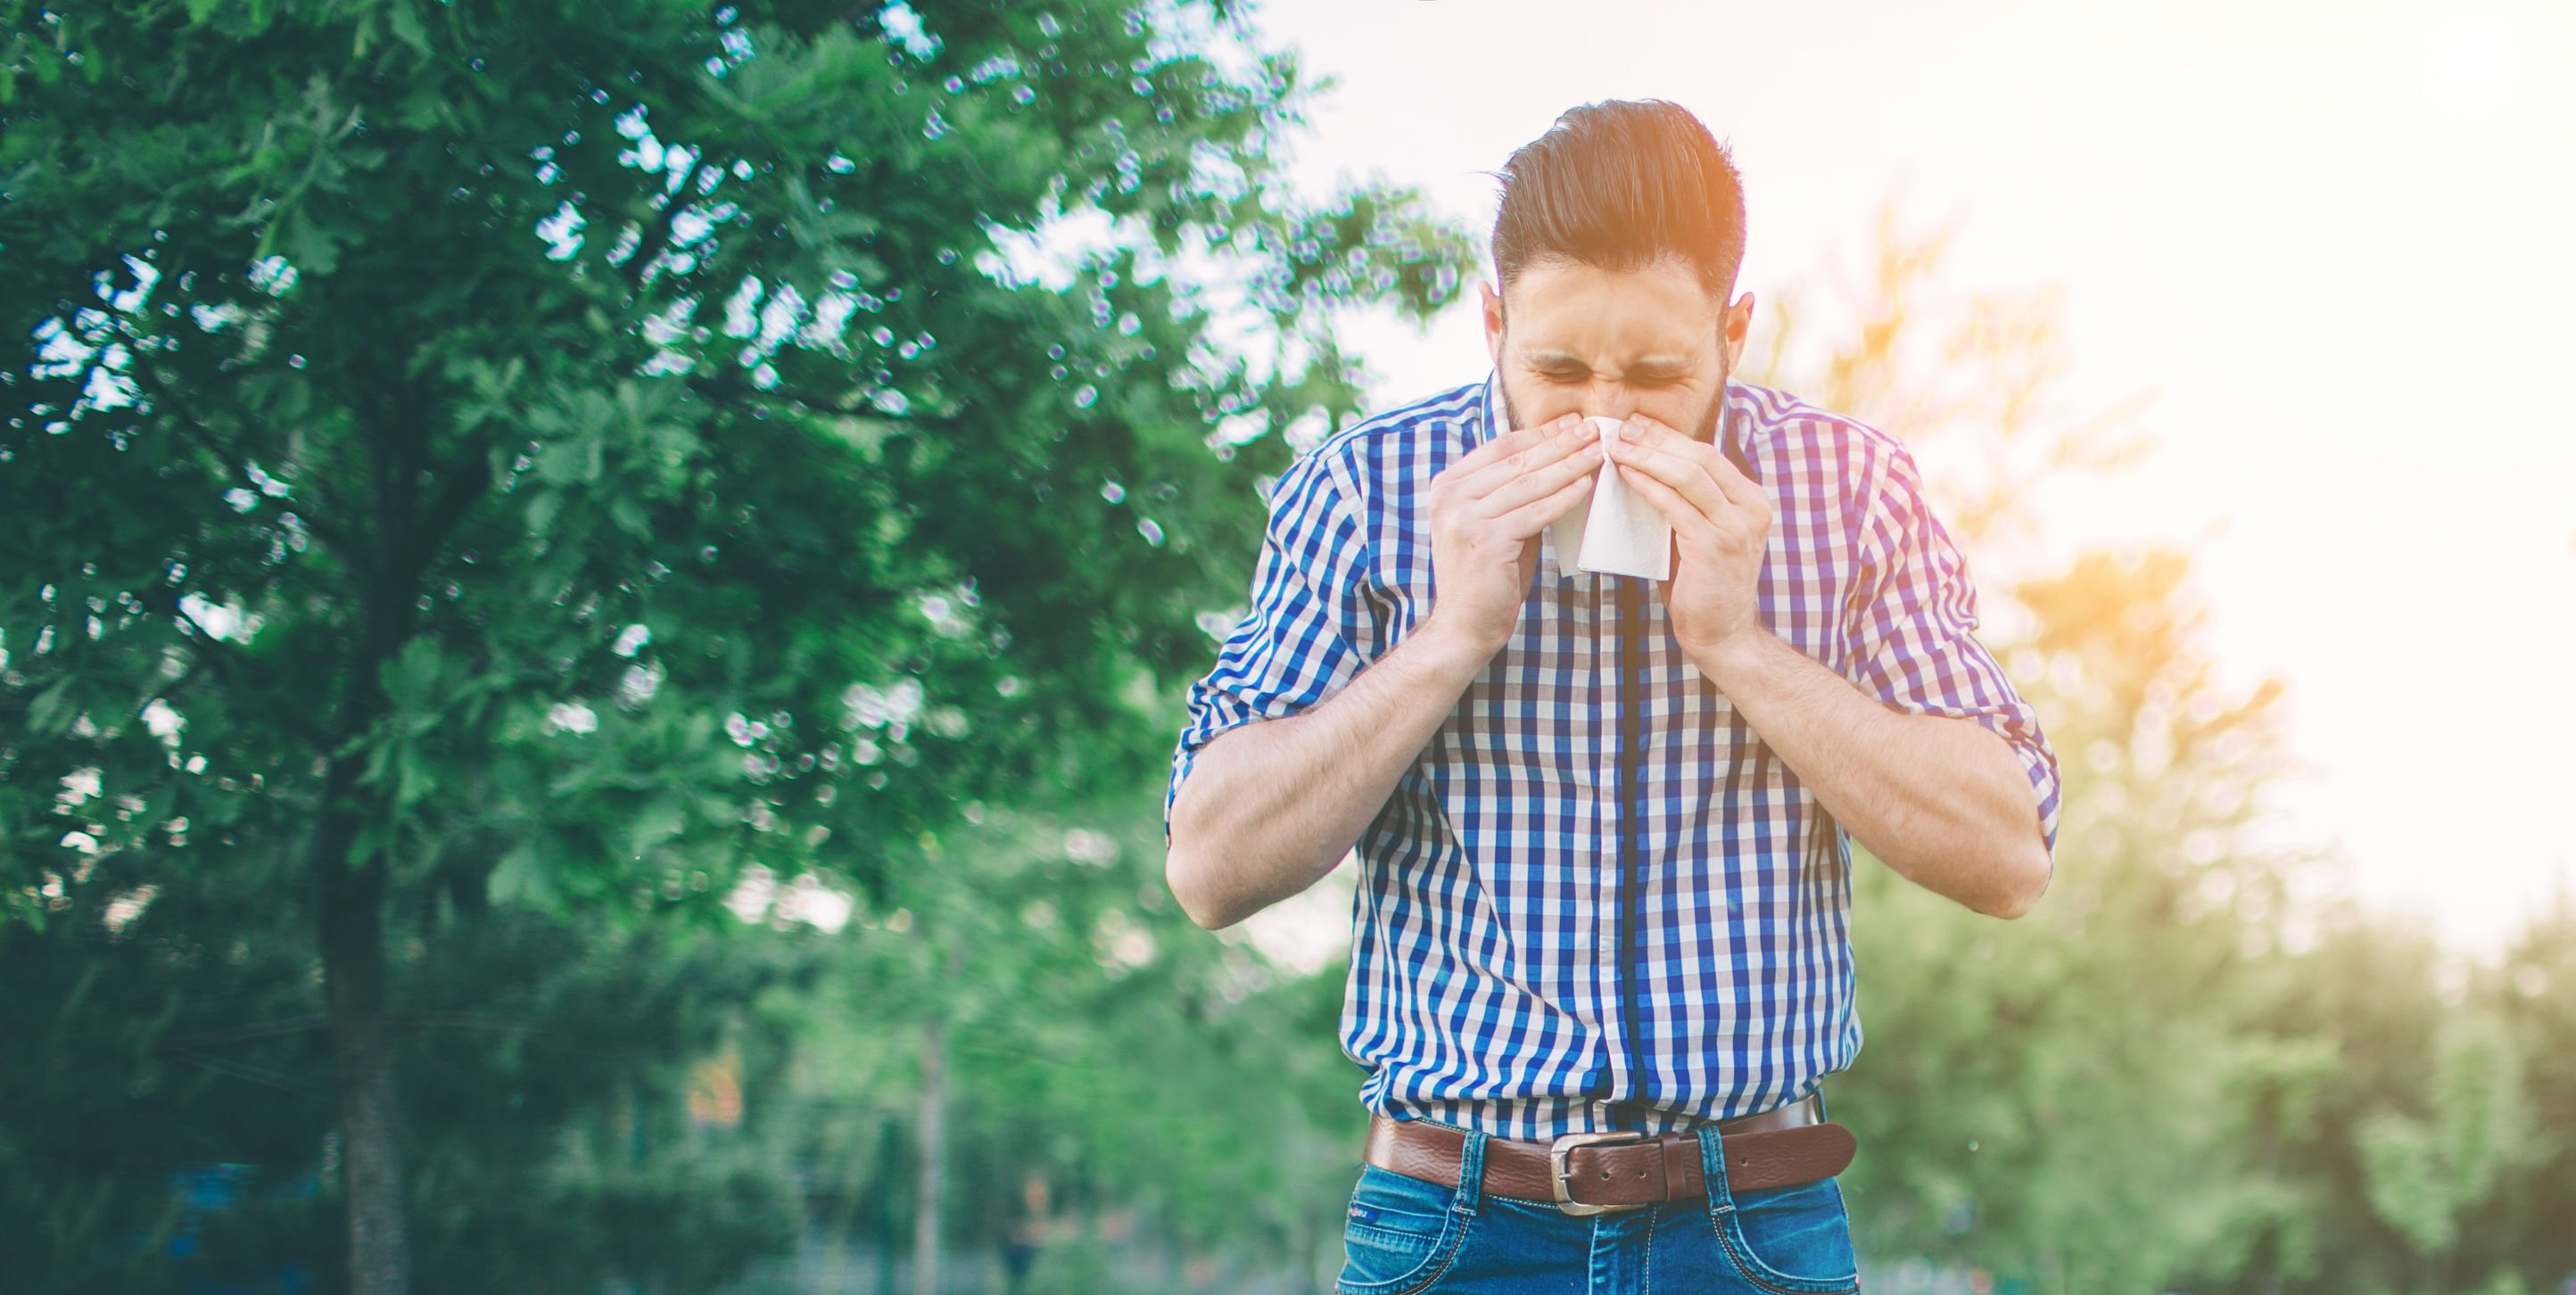 6 Easy Home Remedies to Stop Sneezing